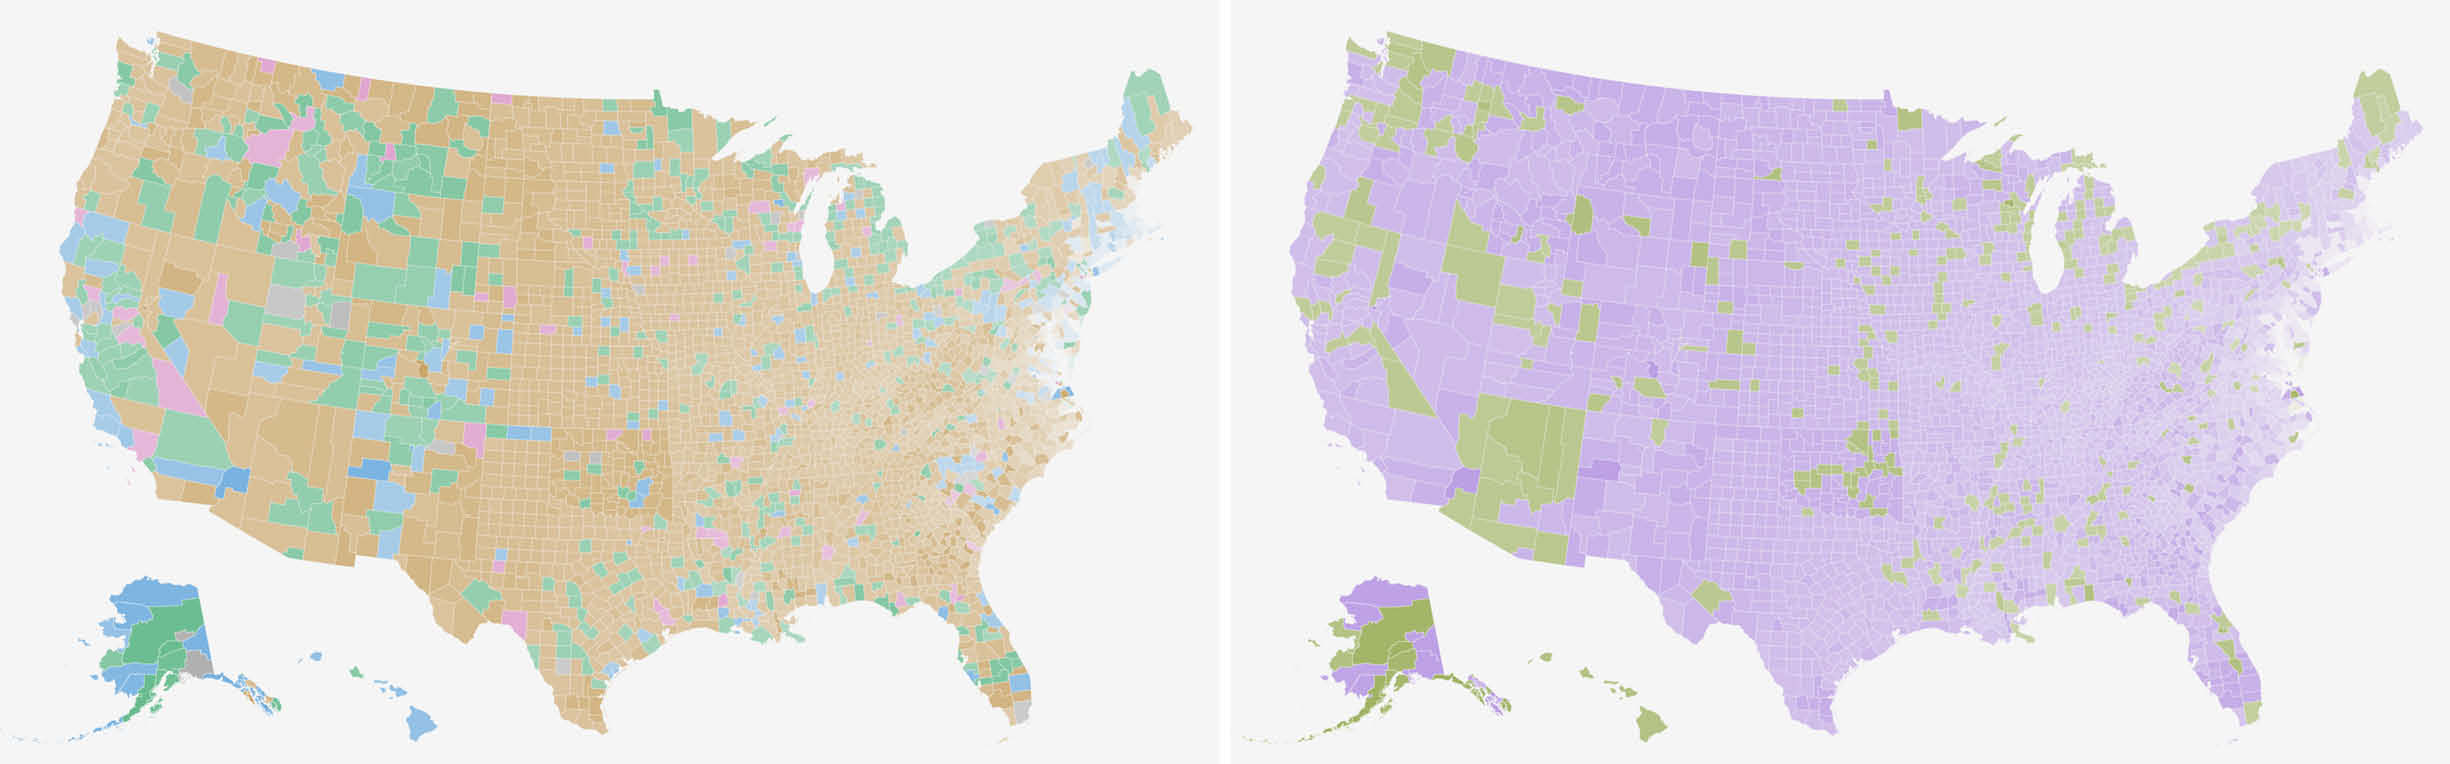 Two choropleths wherein each county is colored either by its name’s high-level language family or its name’s category, the saturation level of which are mapped to the counties ages.